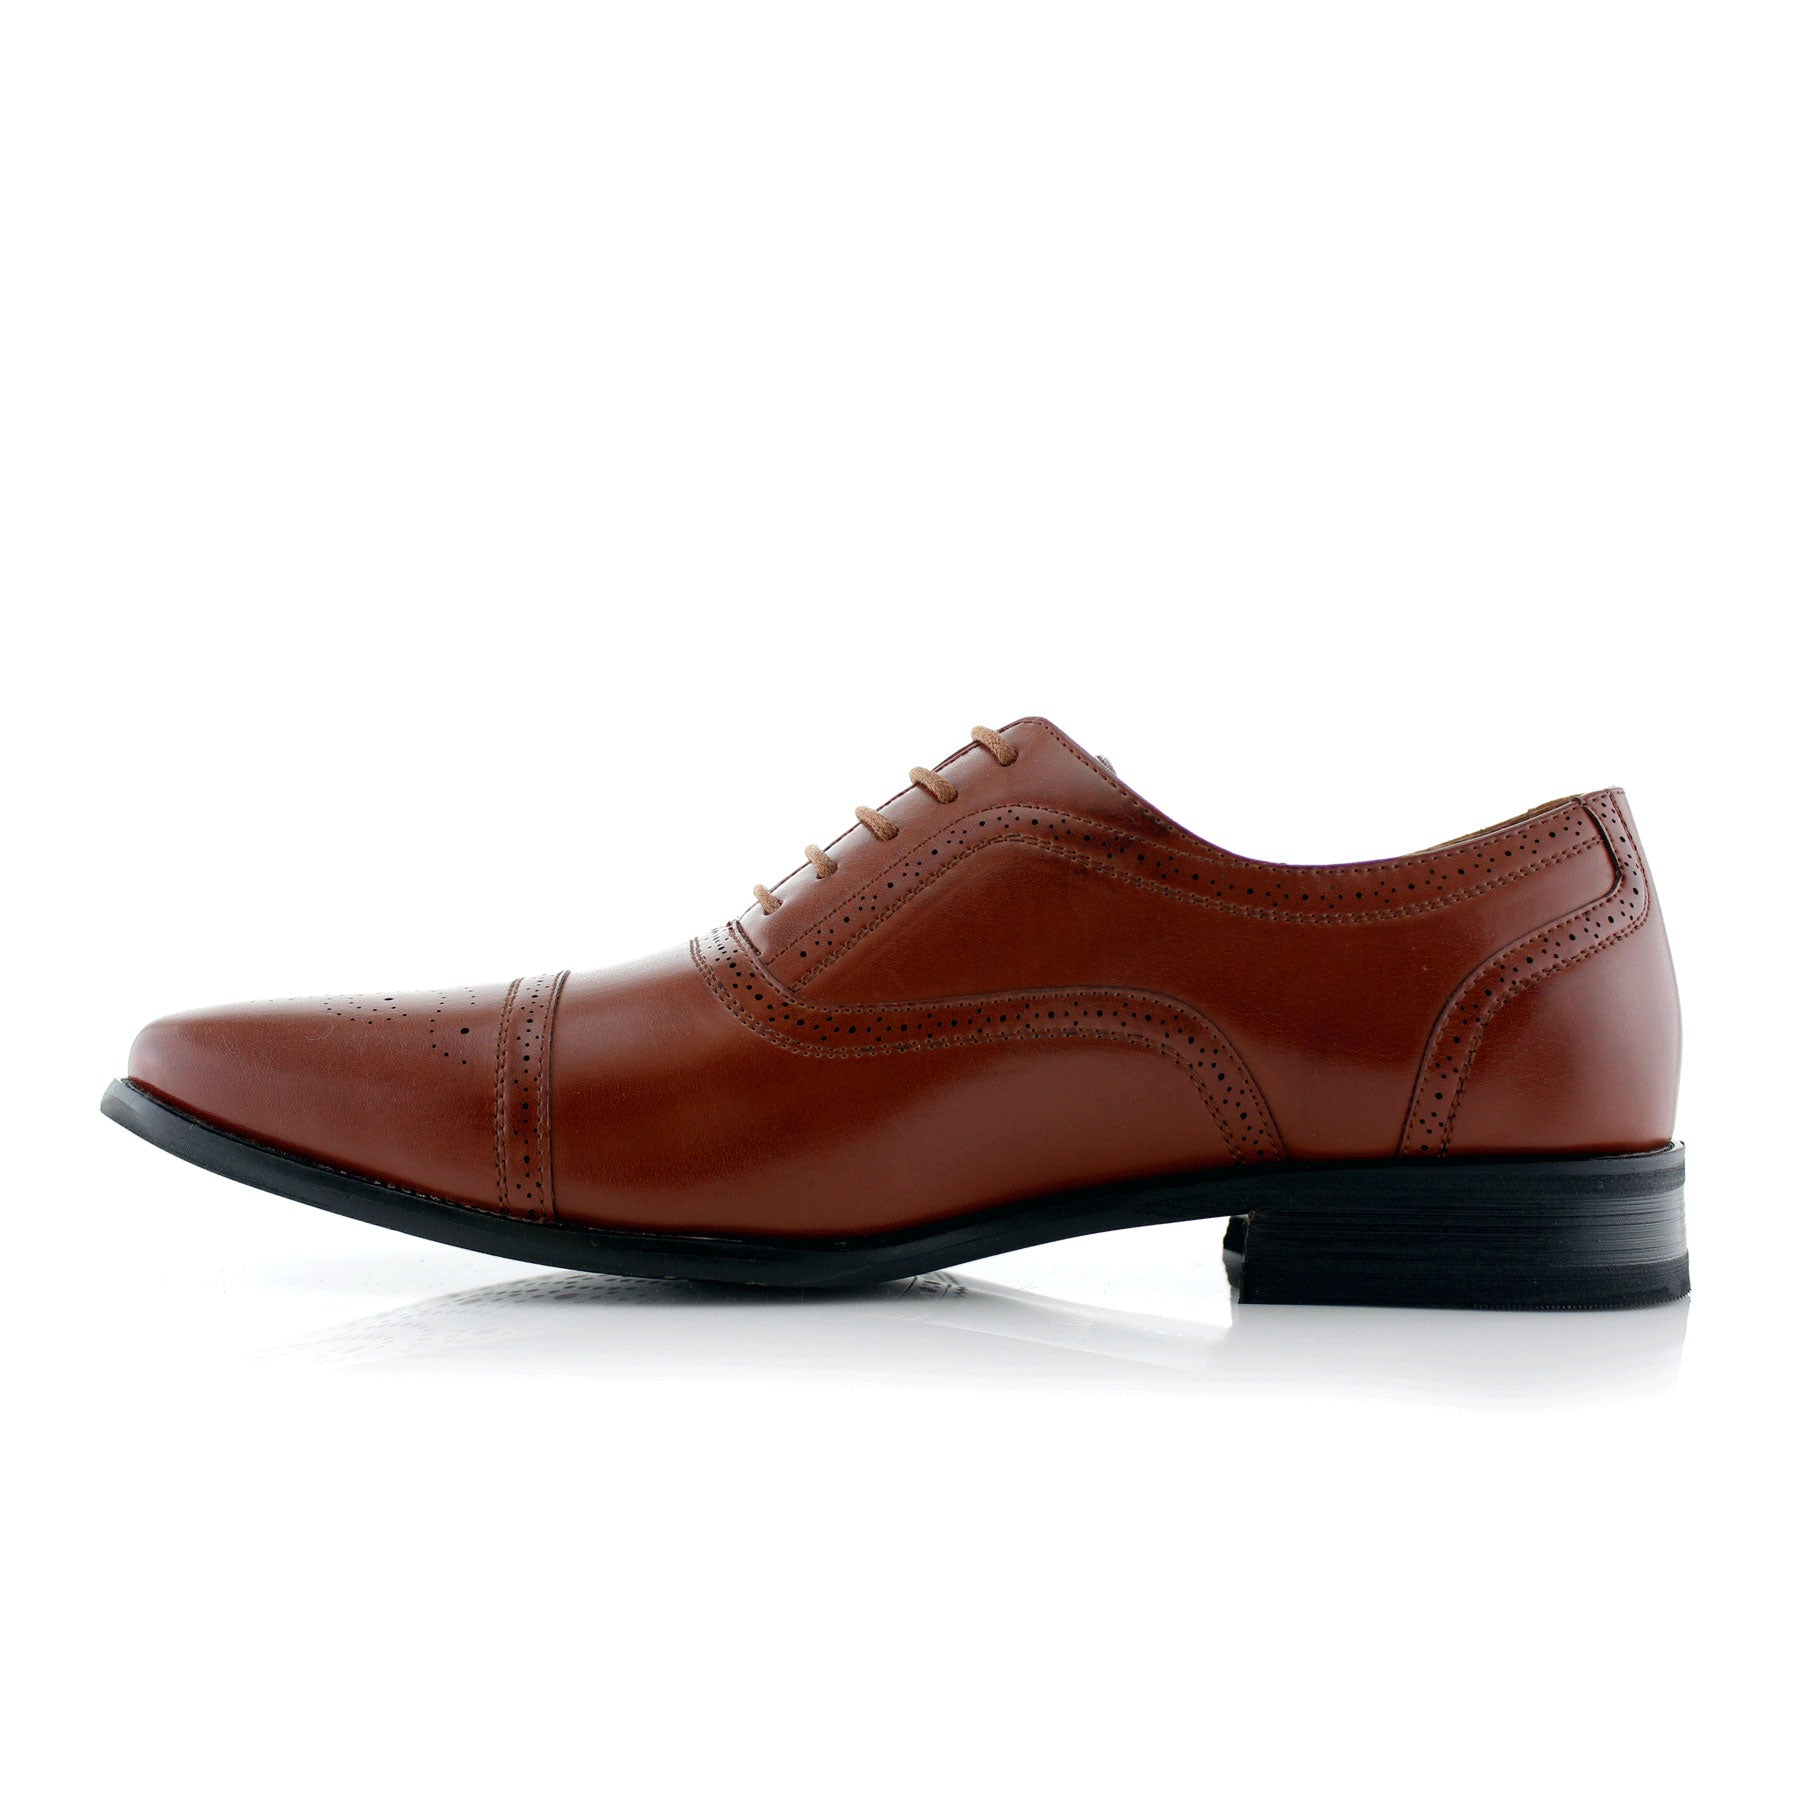 Brogue Oxfords | Todd by Ferro Aldo | Conal Footwear | Inner Side Angle View